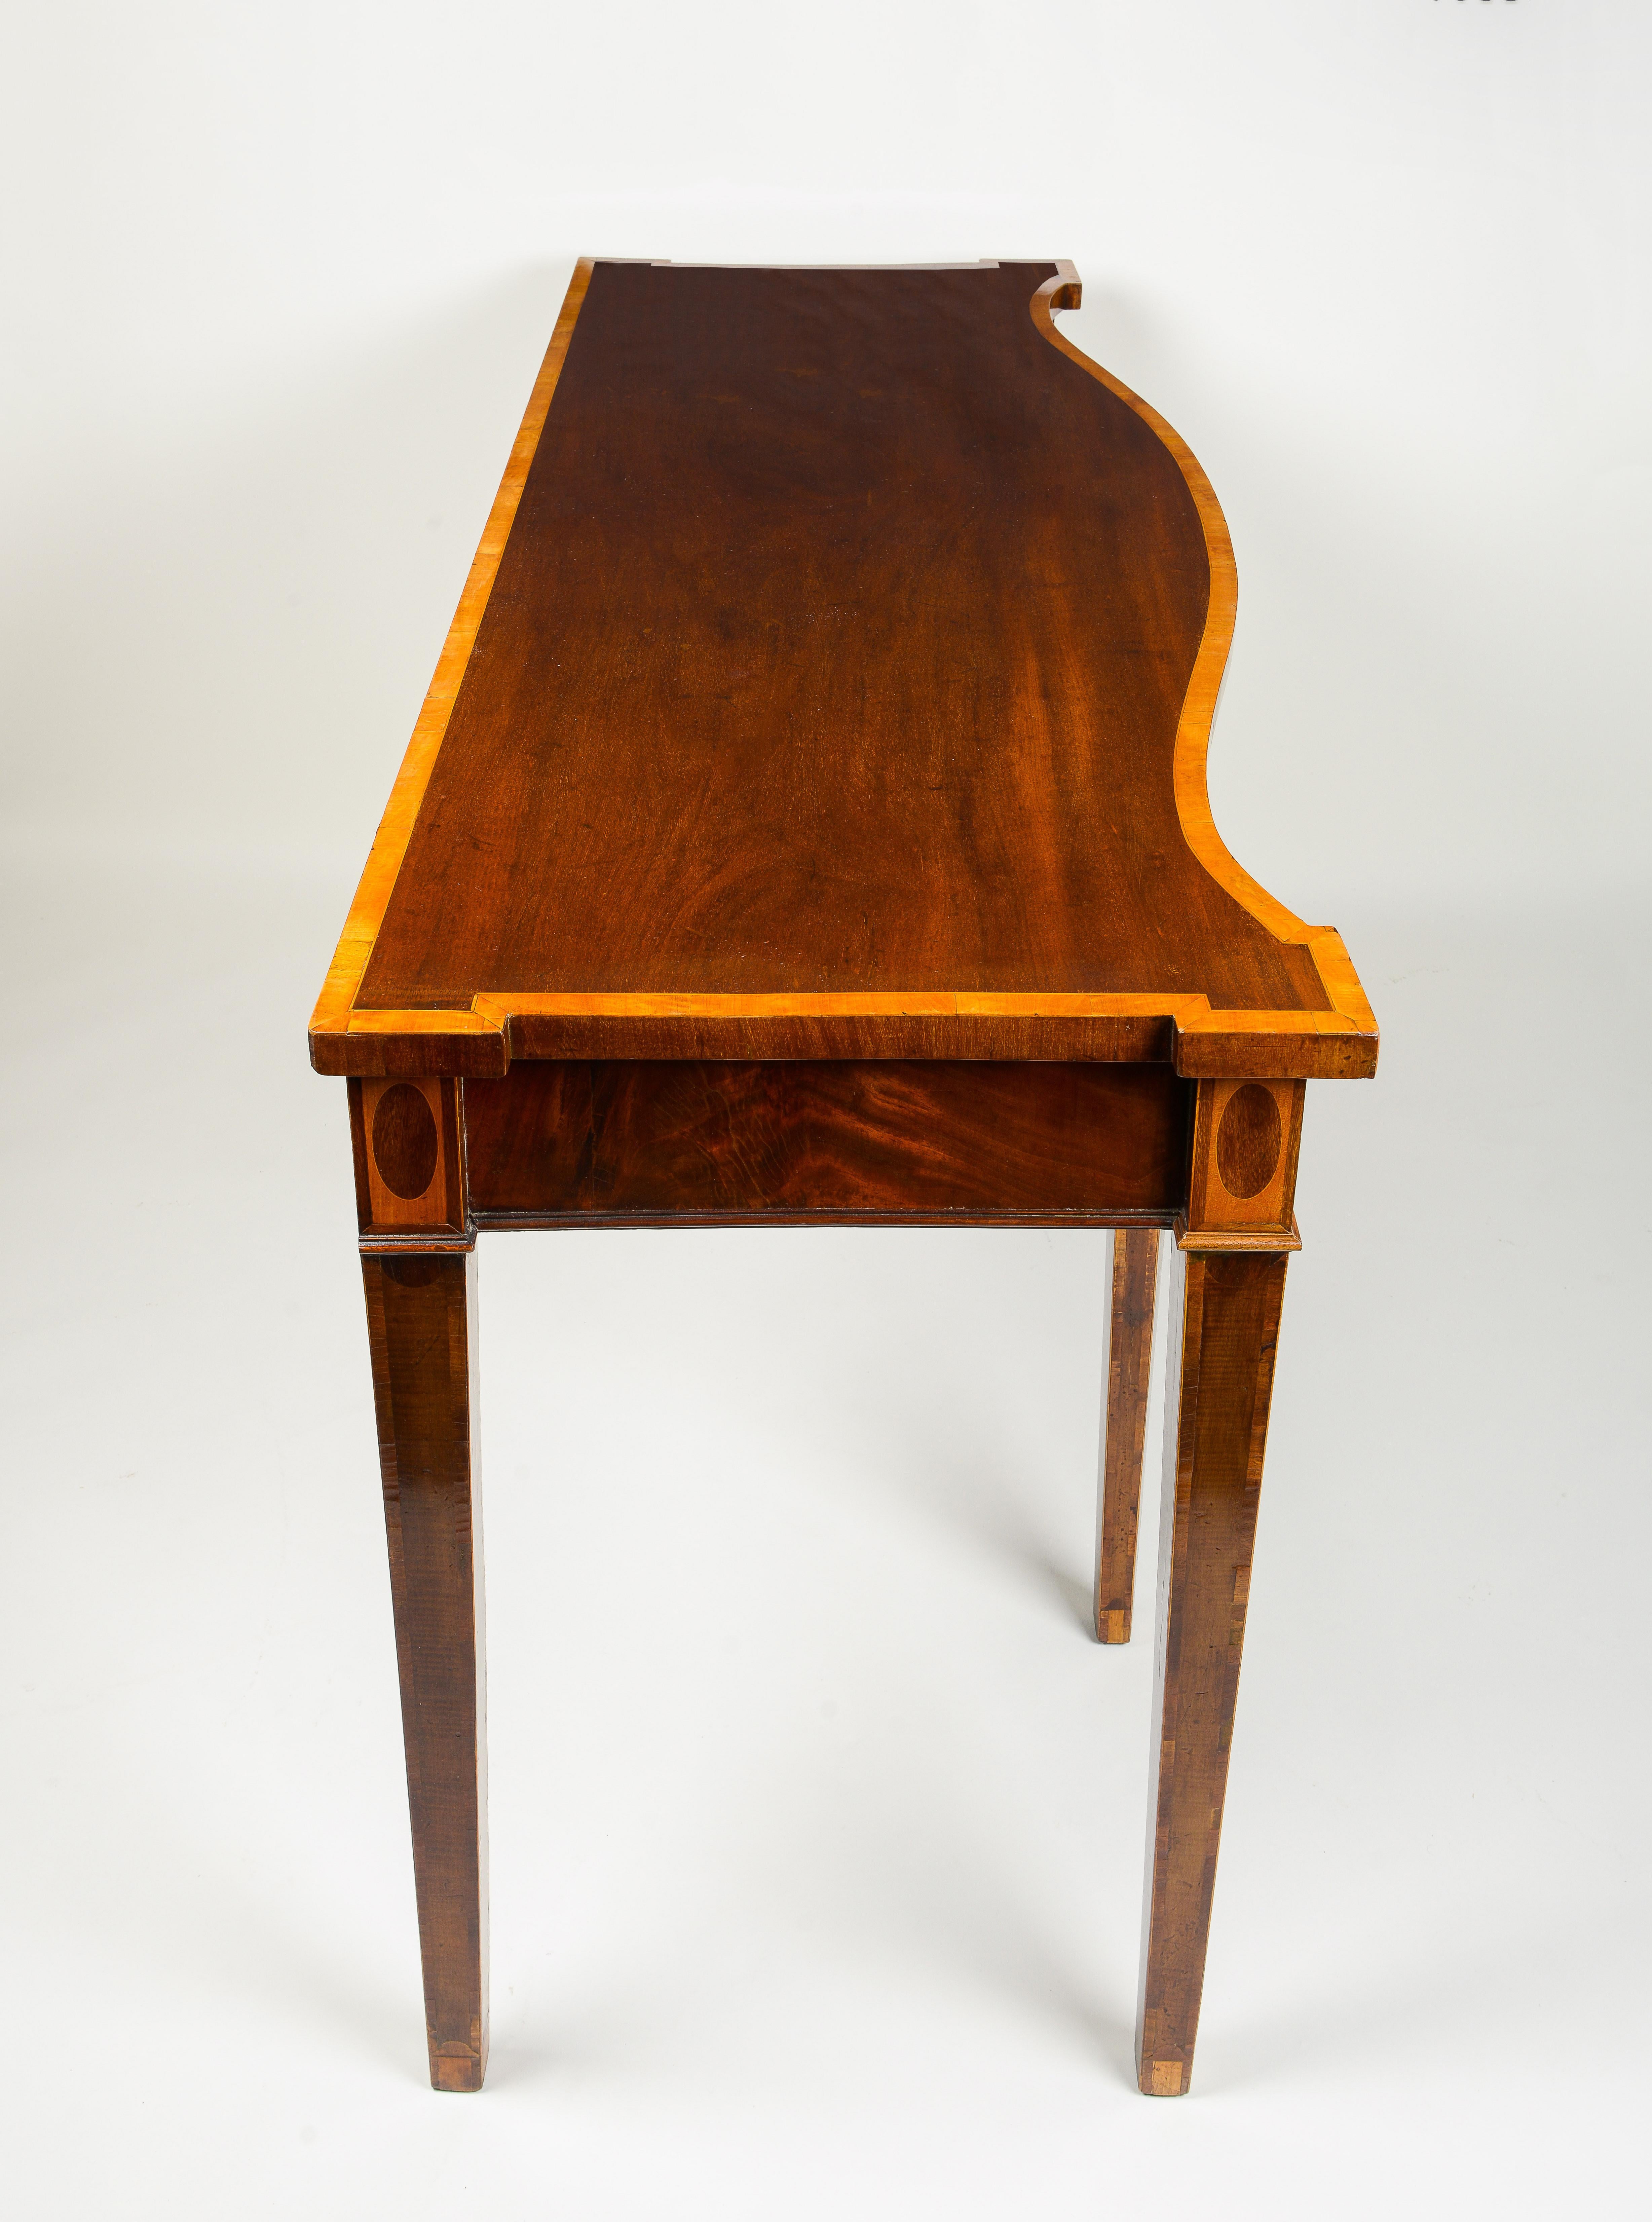 English Fine George III Mahogany and Satinwood-Inlaid Serpentine Serving Table For Sale